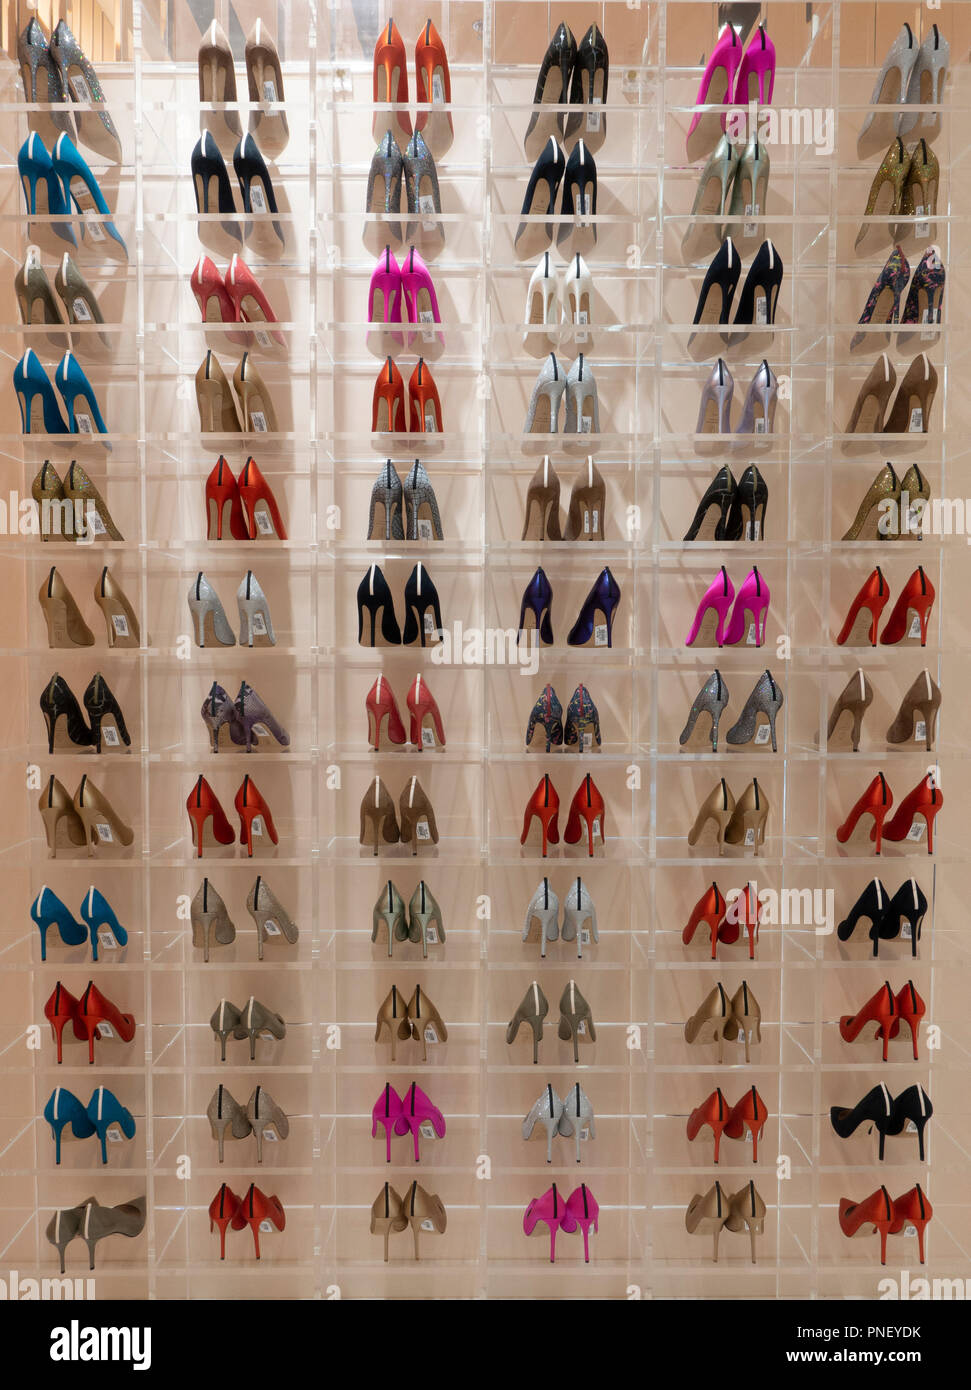 Rows of womens shoes in SJP Sarah Jessica Parker shoe store inside Dubai Mall, UAE Stock Photo